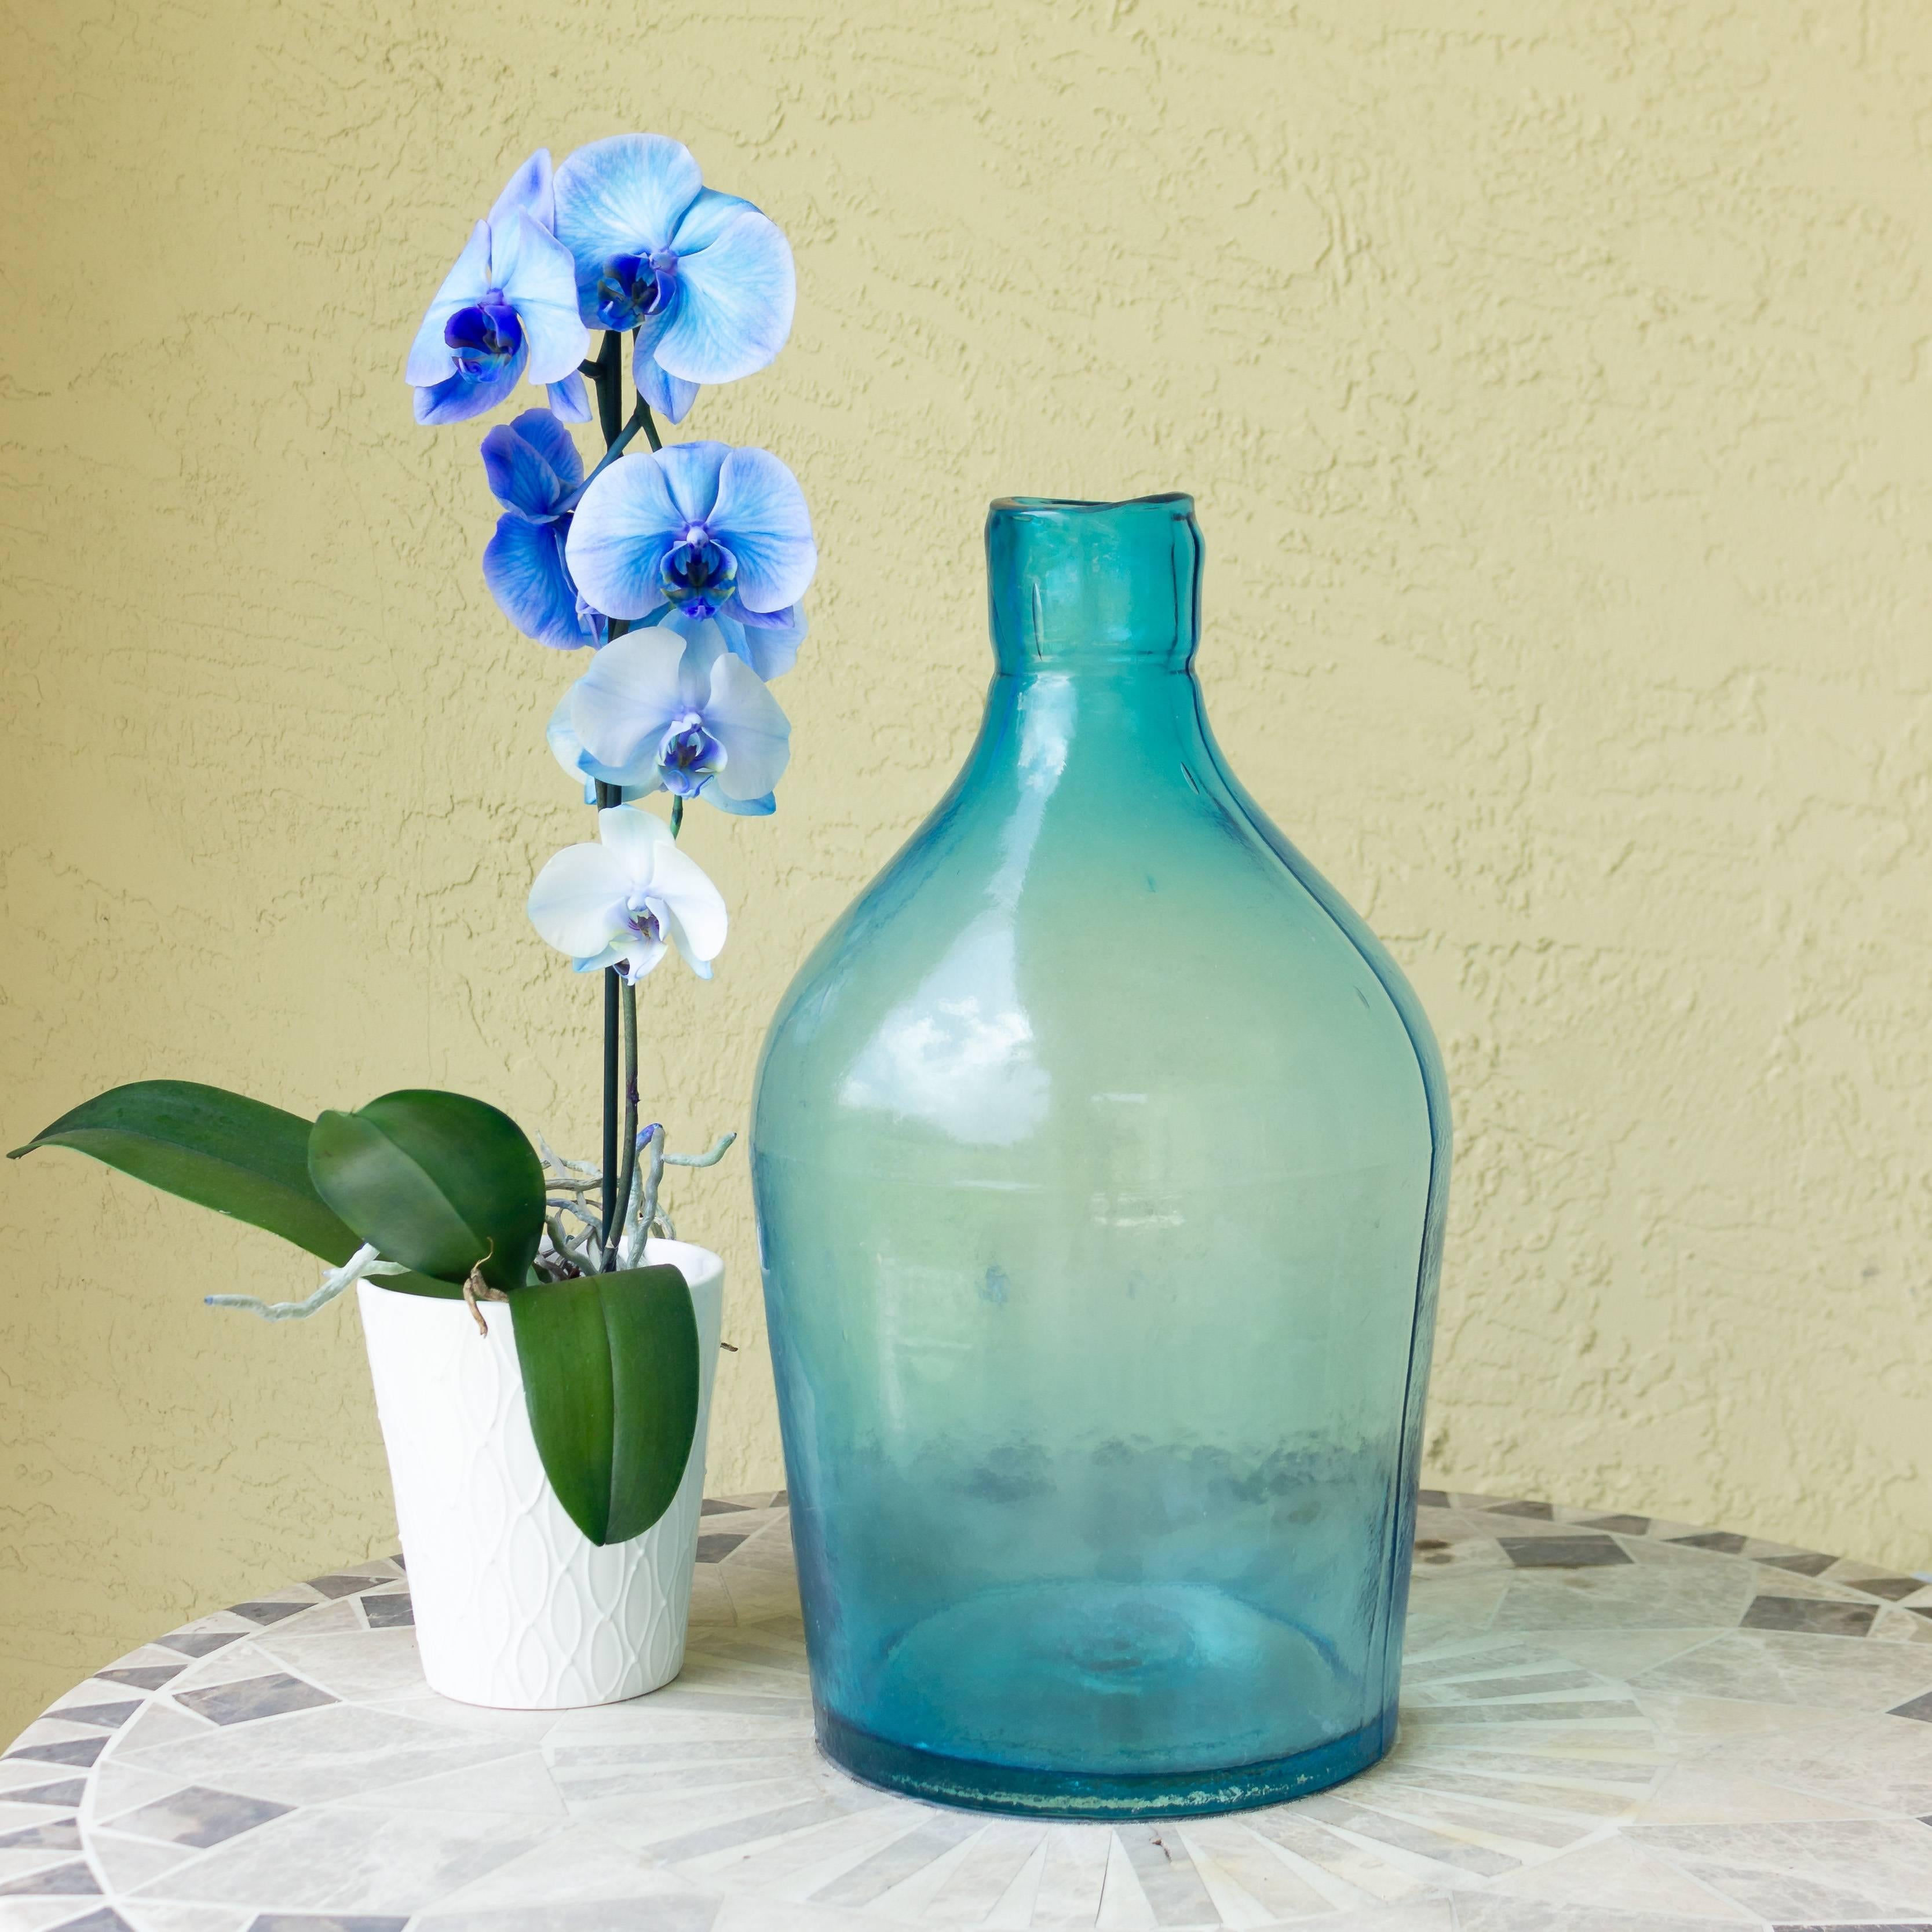 Two handblown blue glass bottles. Originally used for fishing and boating in Japan with a rope netting which has been removed. Two similar pieces of glass with the original rope netting are available.

The larger piece measures 17